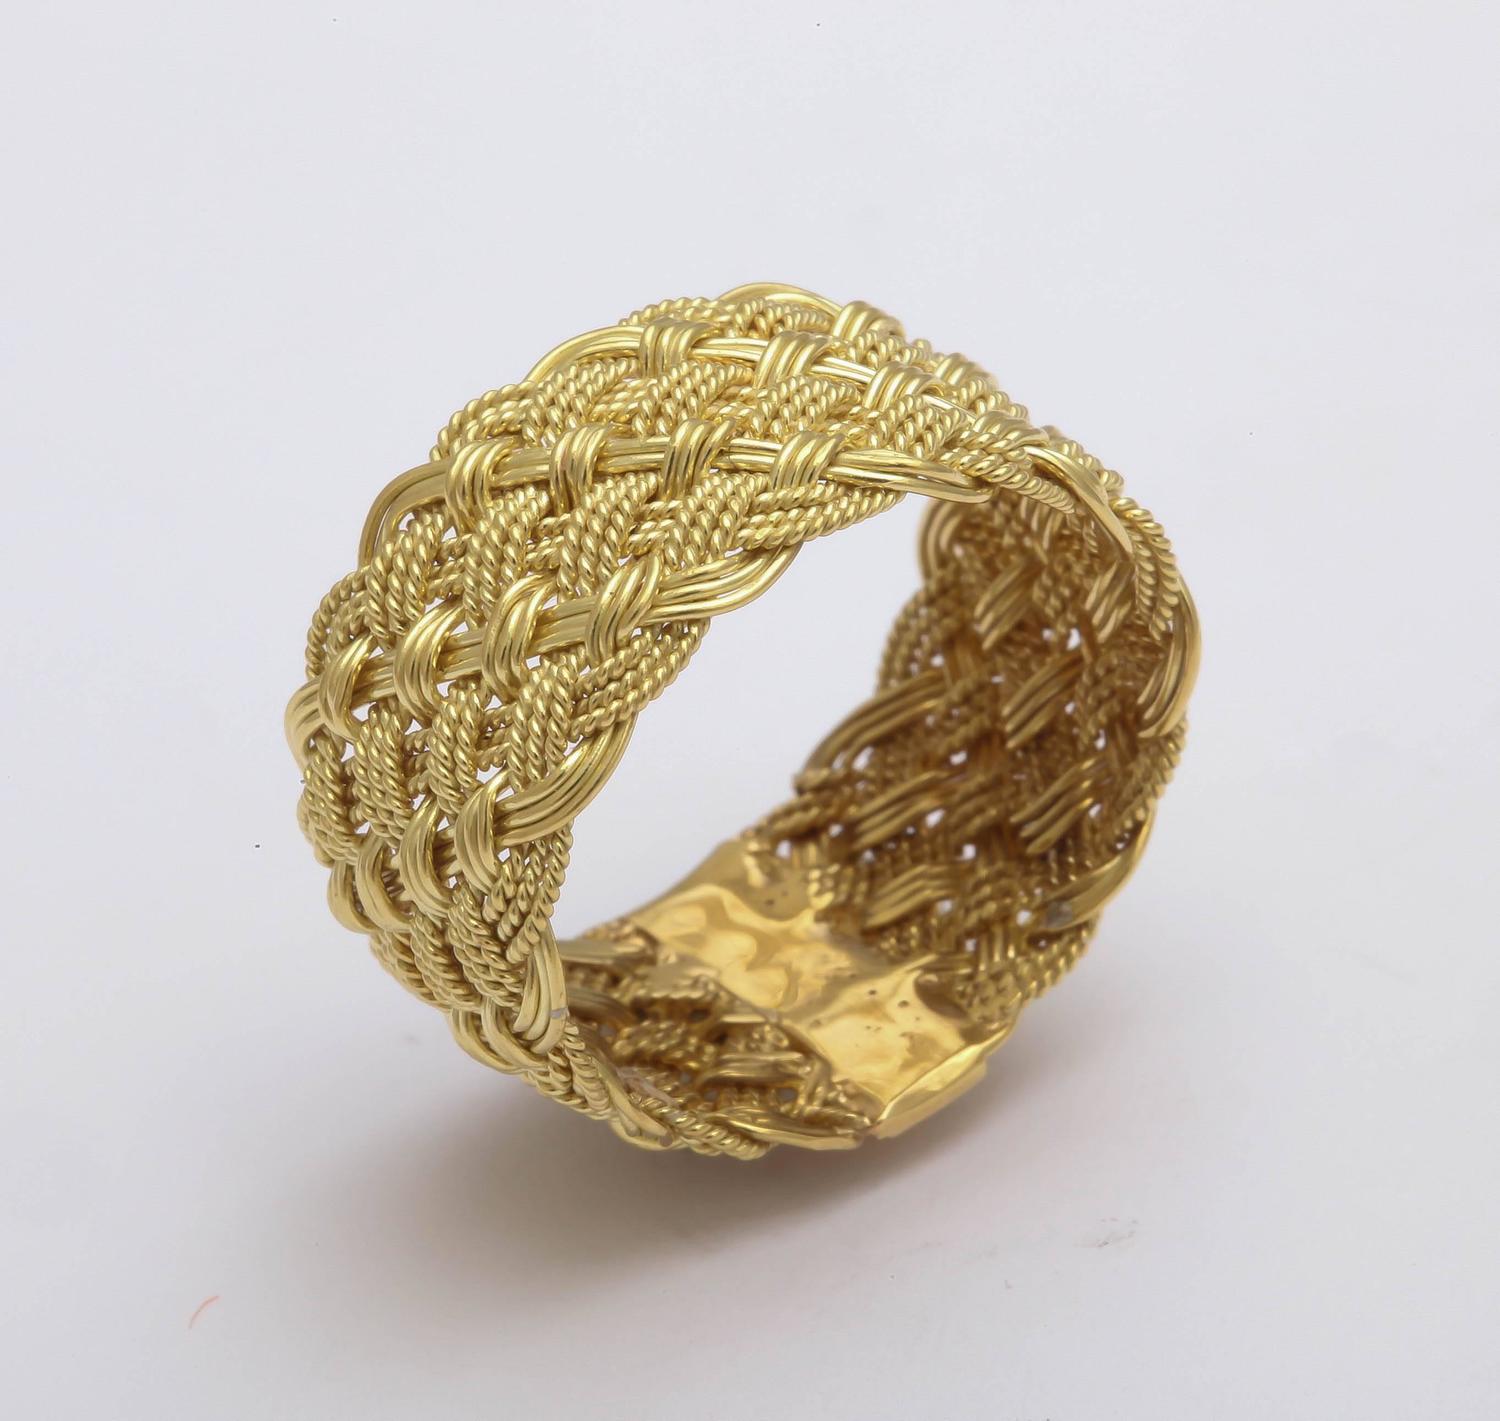 Hand Woven Italian Gold Band Ring For Sale at 1stdibs